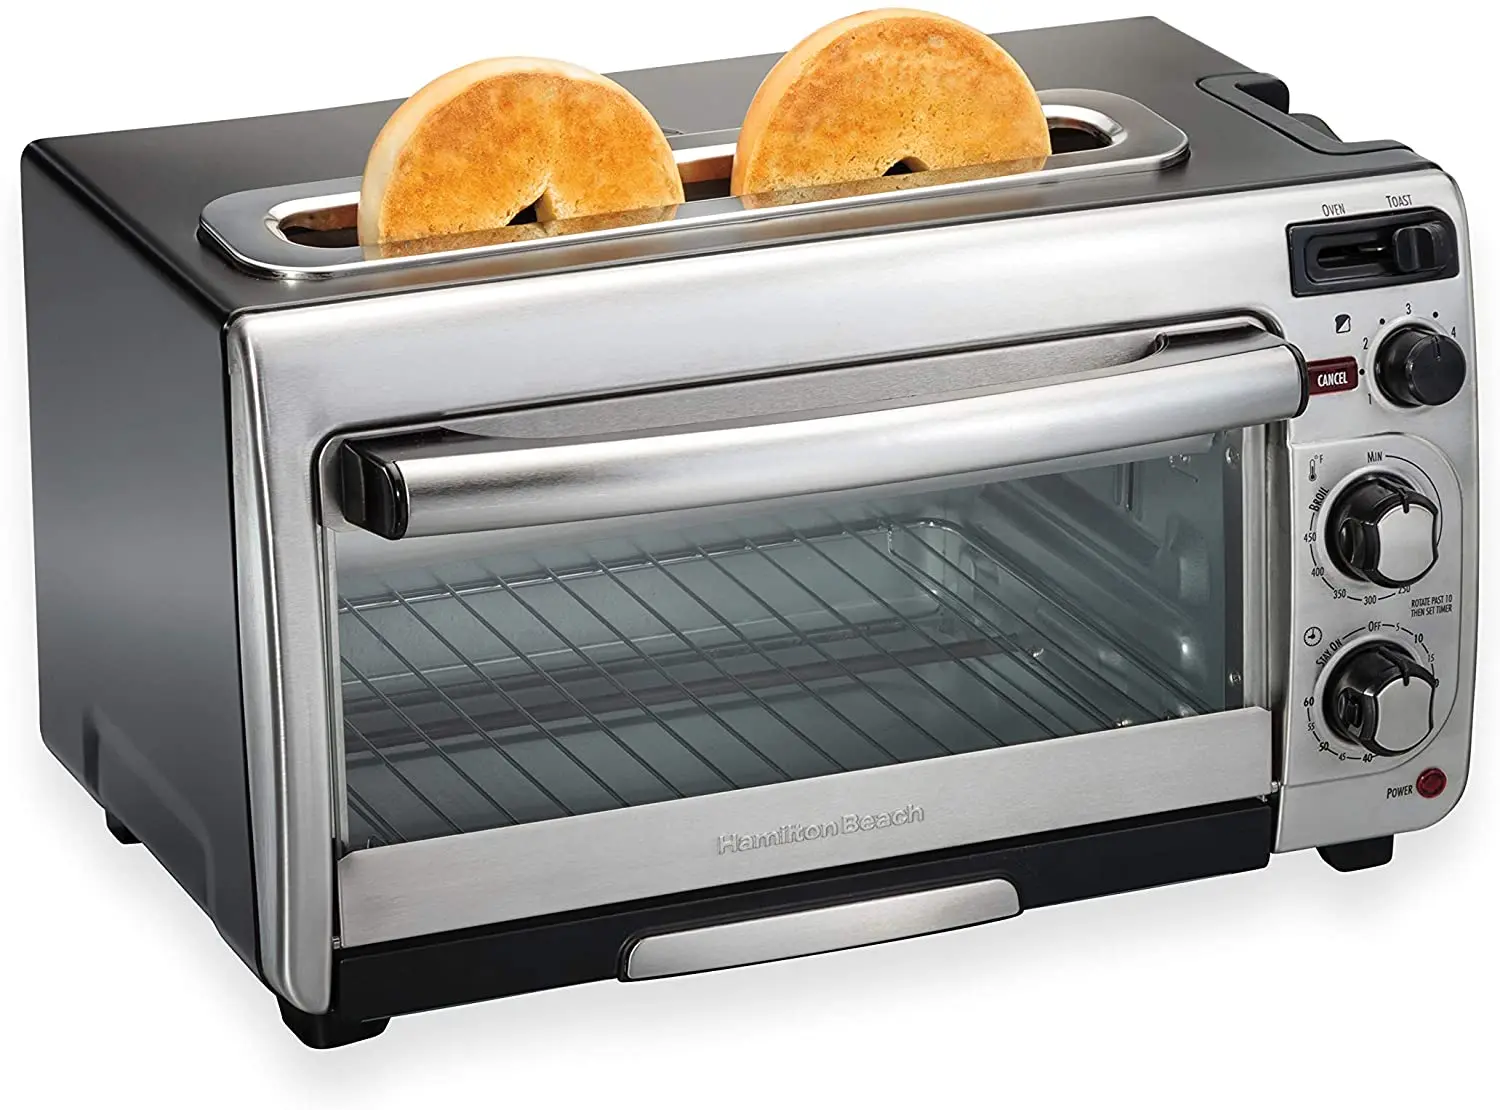 2-in-1 Countertop Oven and Long Slot Toaster Stainless Steel 60 Minute Timer and Automatic Shut Off